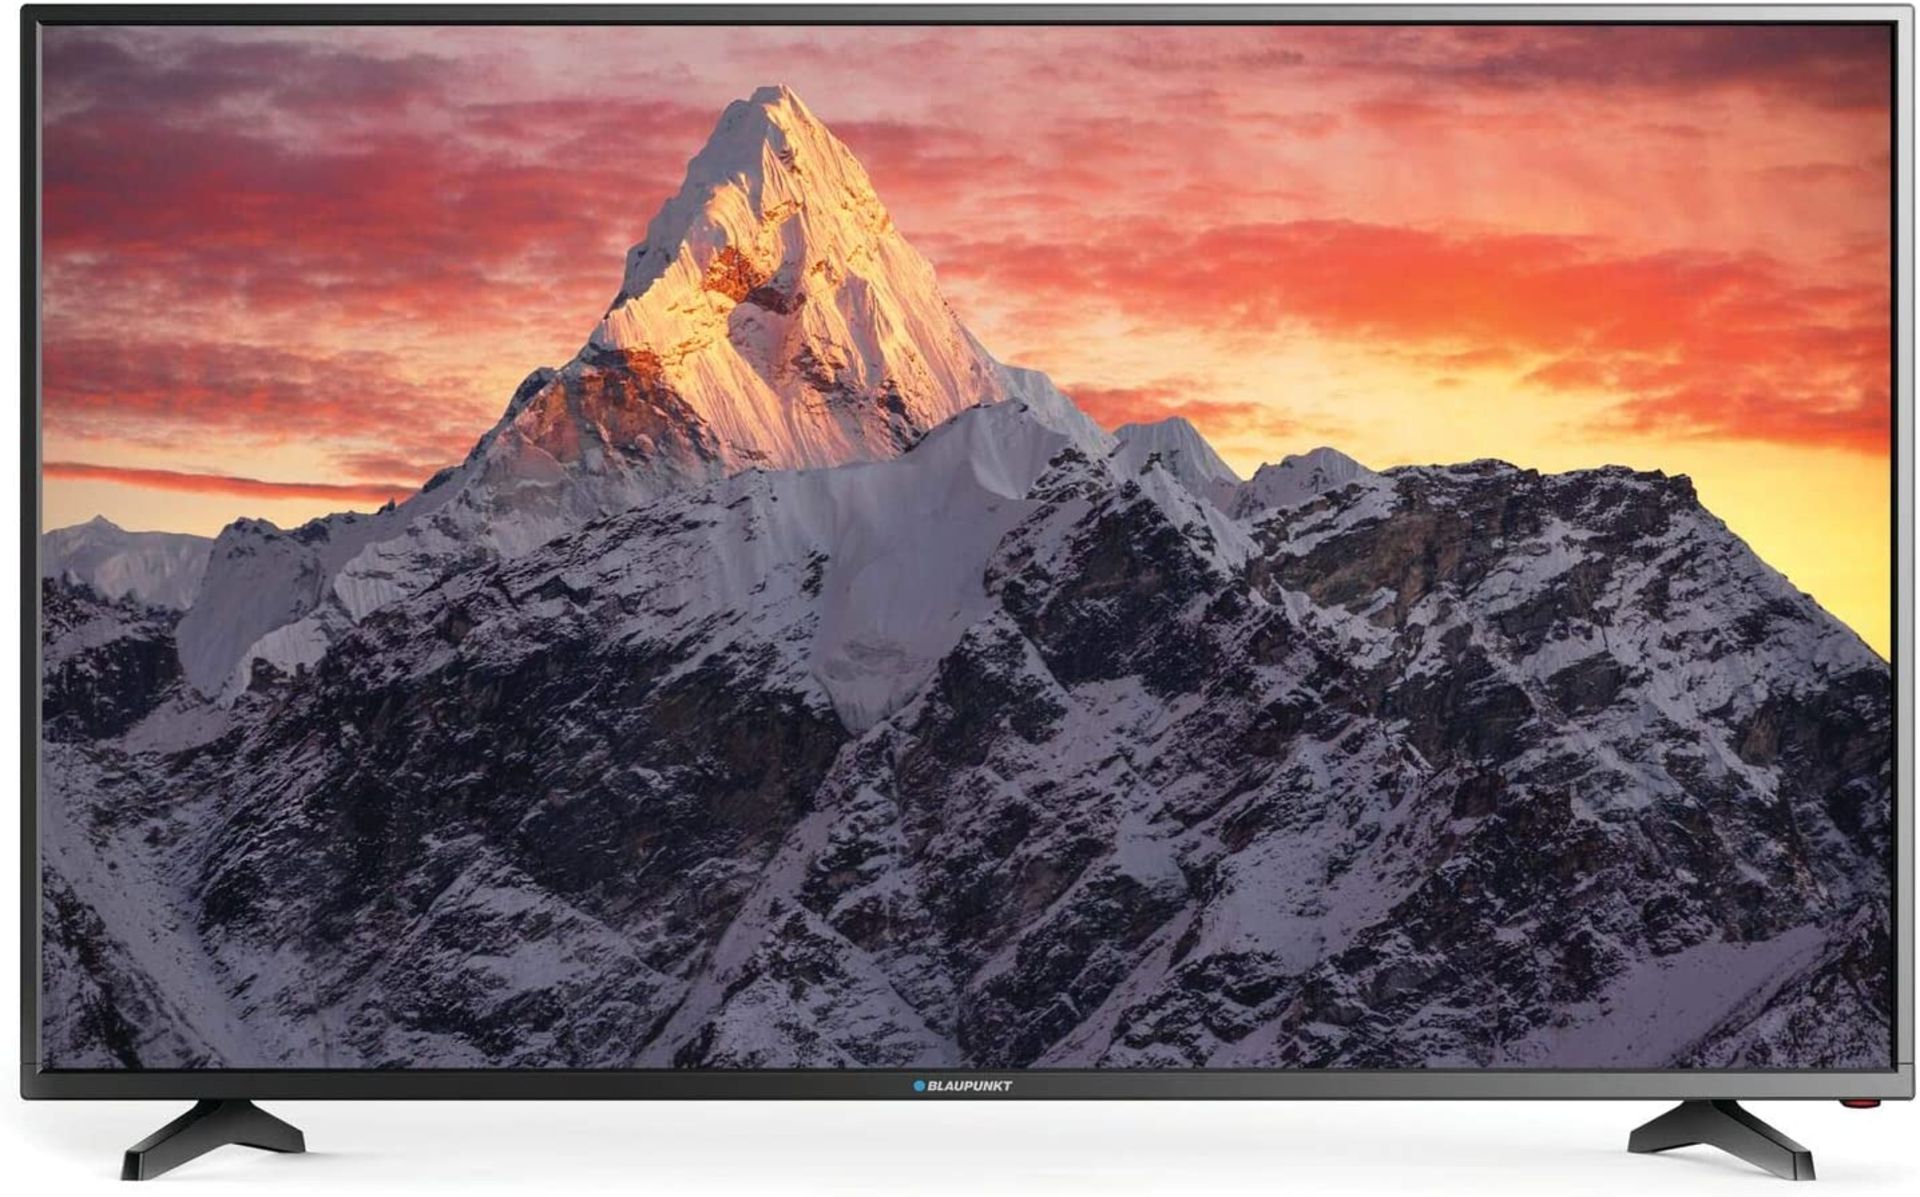 BRAND NEW BLAUPUNKT 55 INCH 4K UHD LED SMART TV NETFLIX FREEVIEW HD FREEVIEW PLAY SOARVIEW